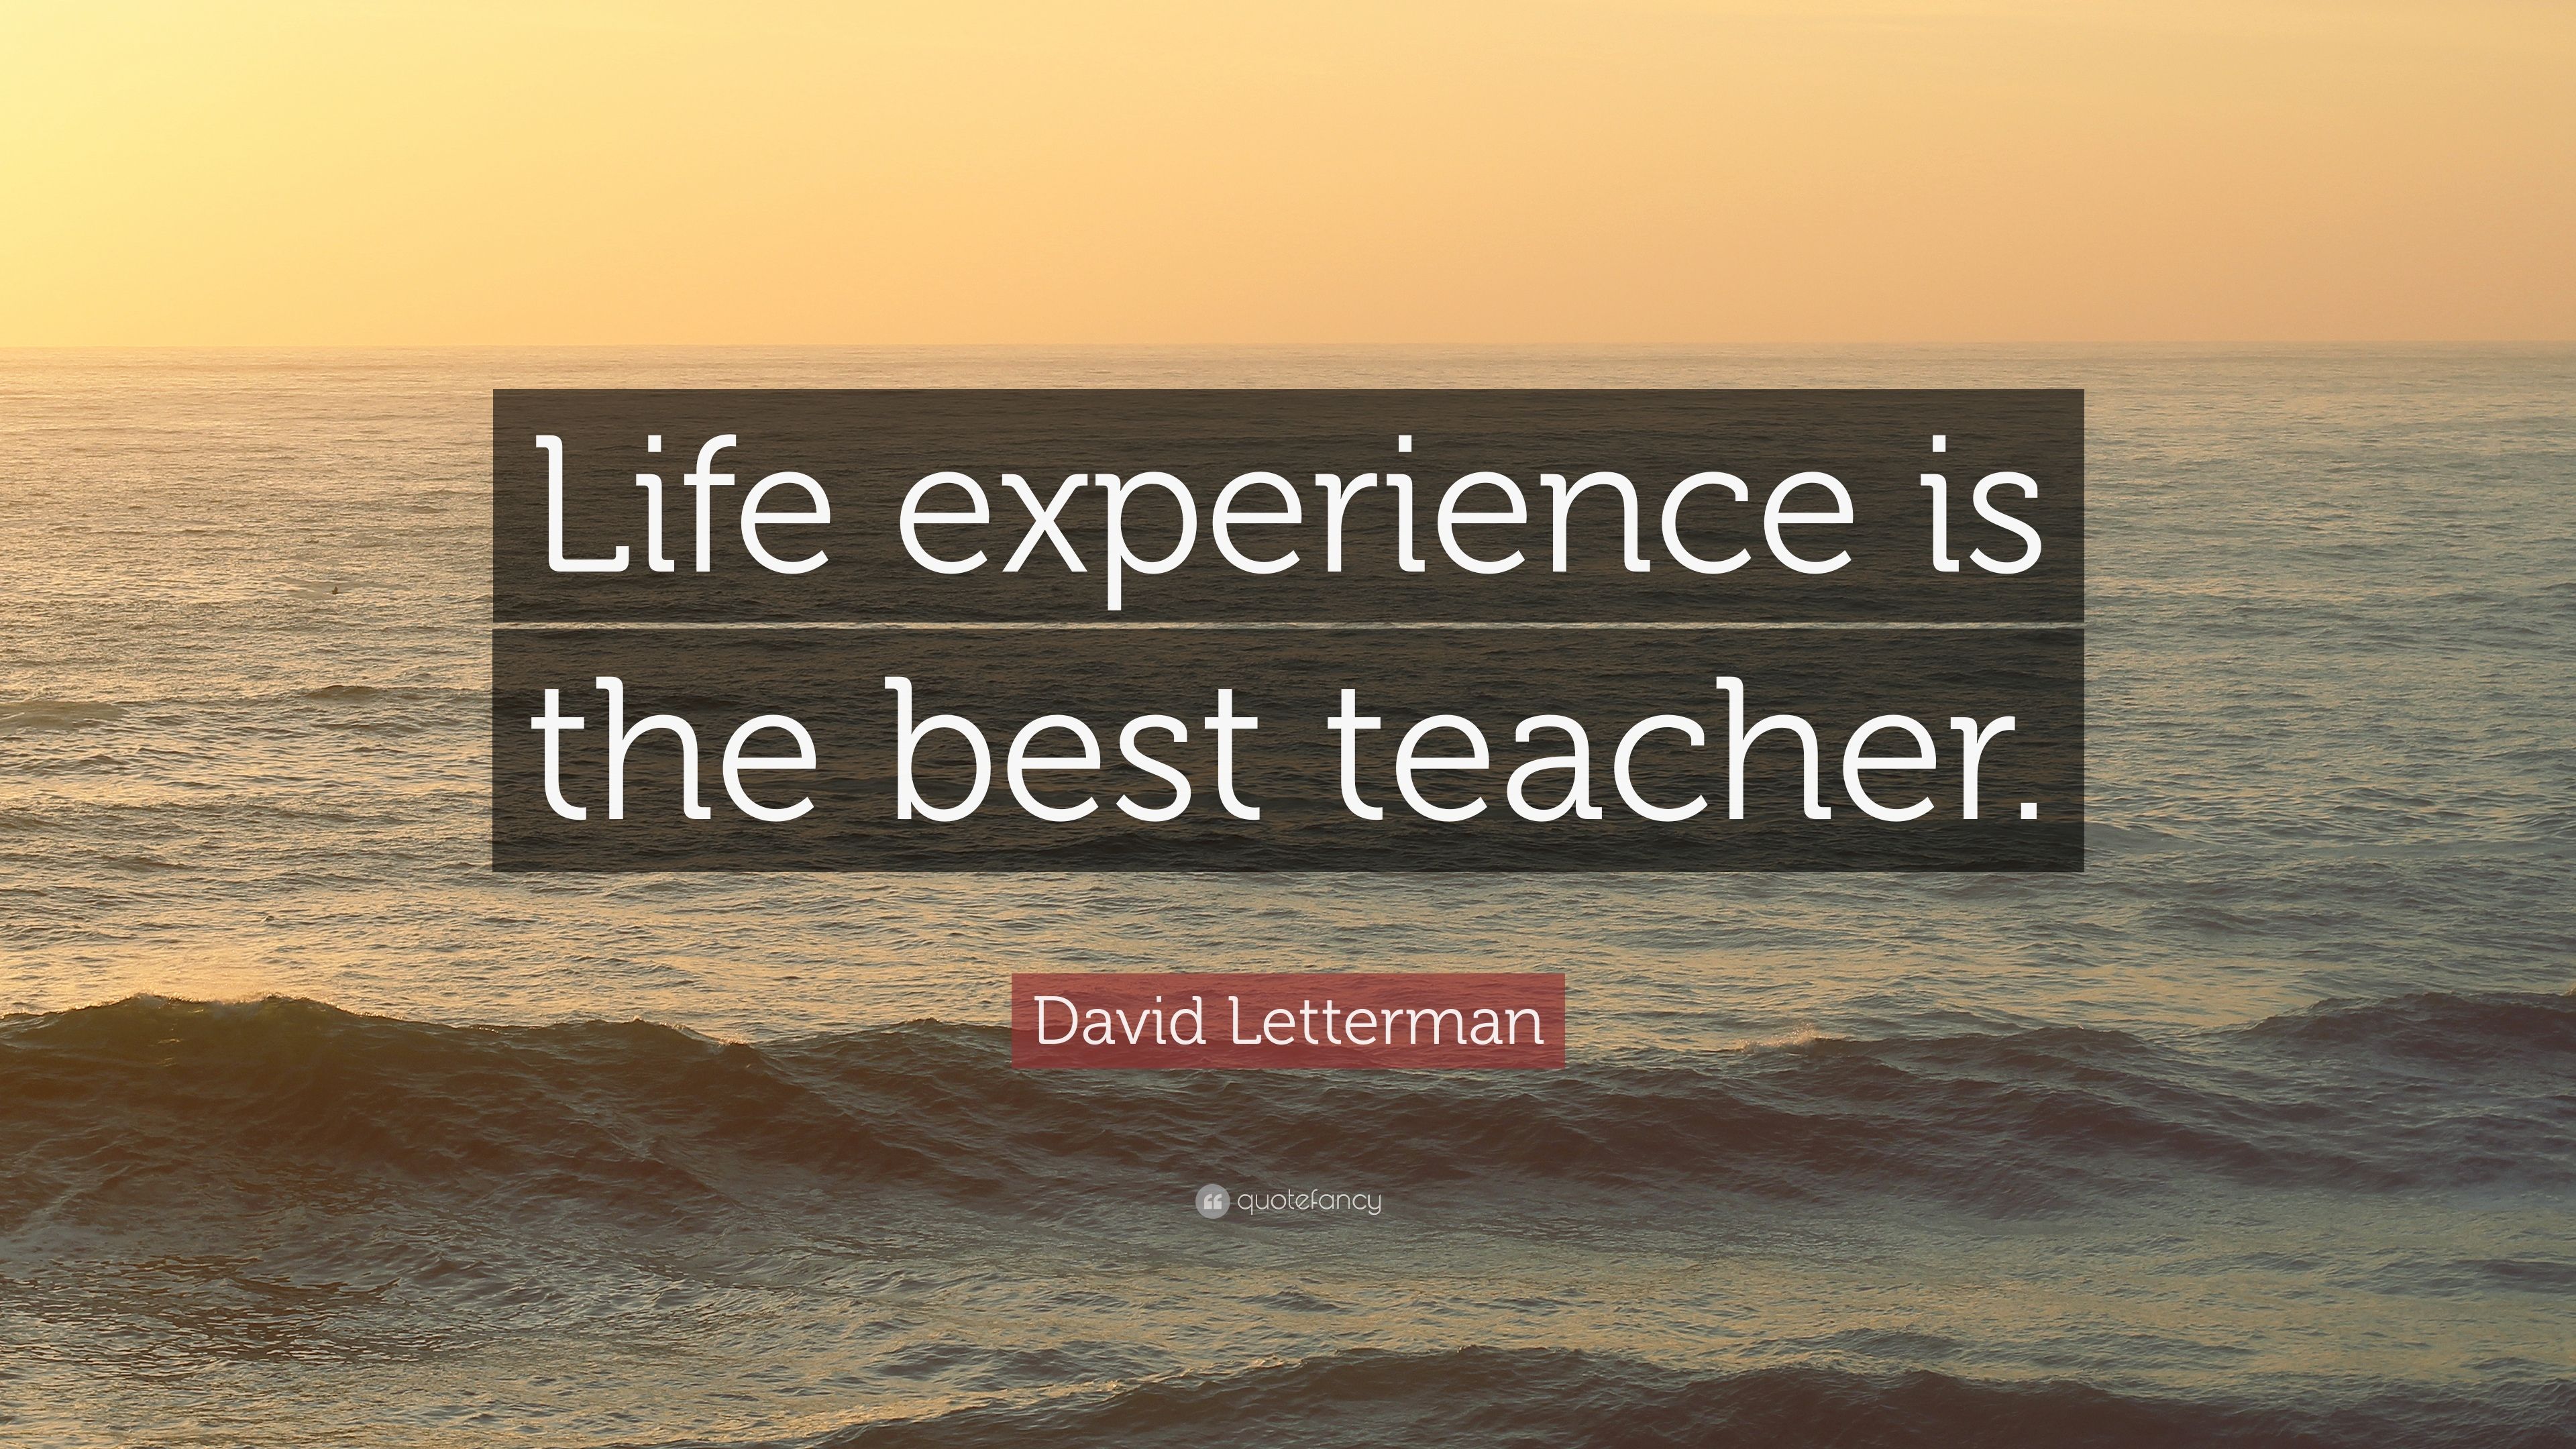 David Letterman Quote: “Life experience is the best teacher.” (10 wallpaper)